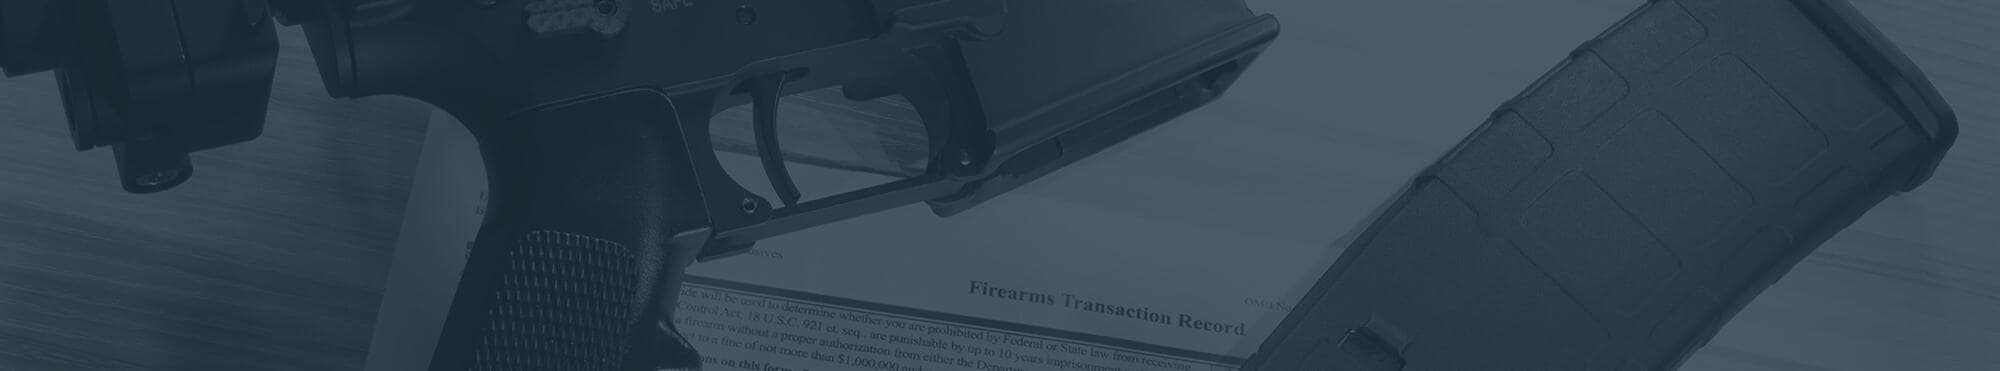 Free FFL consultation to maintain ATF compliance